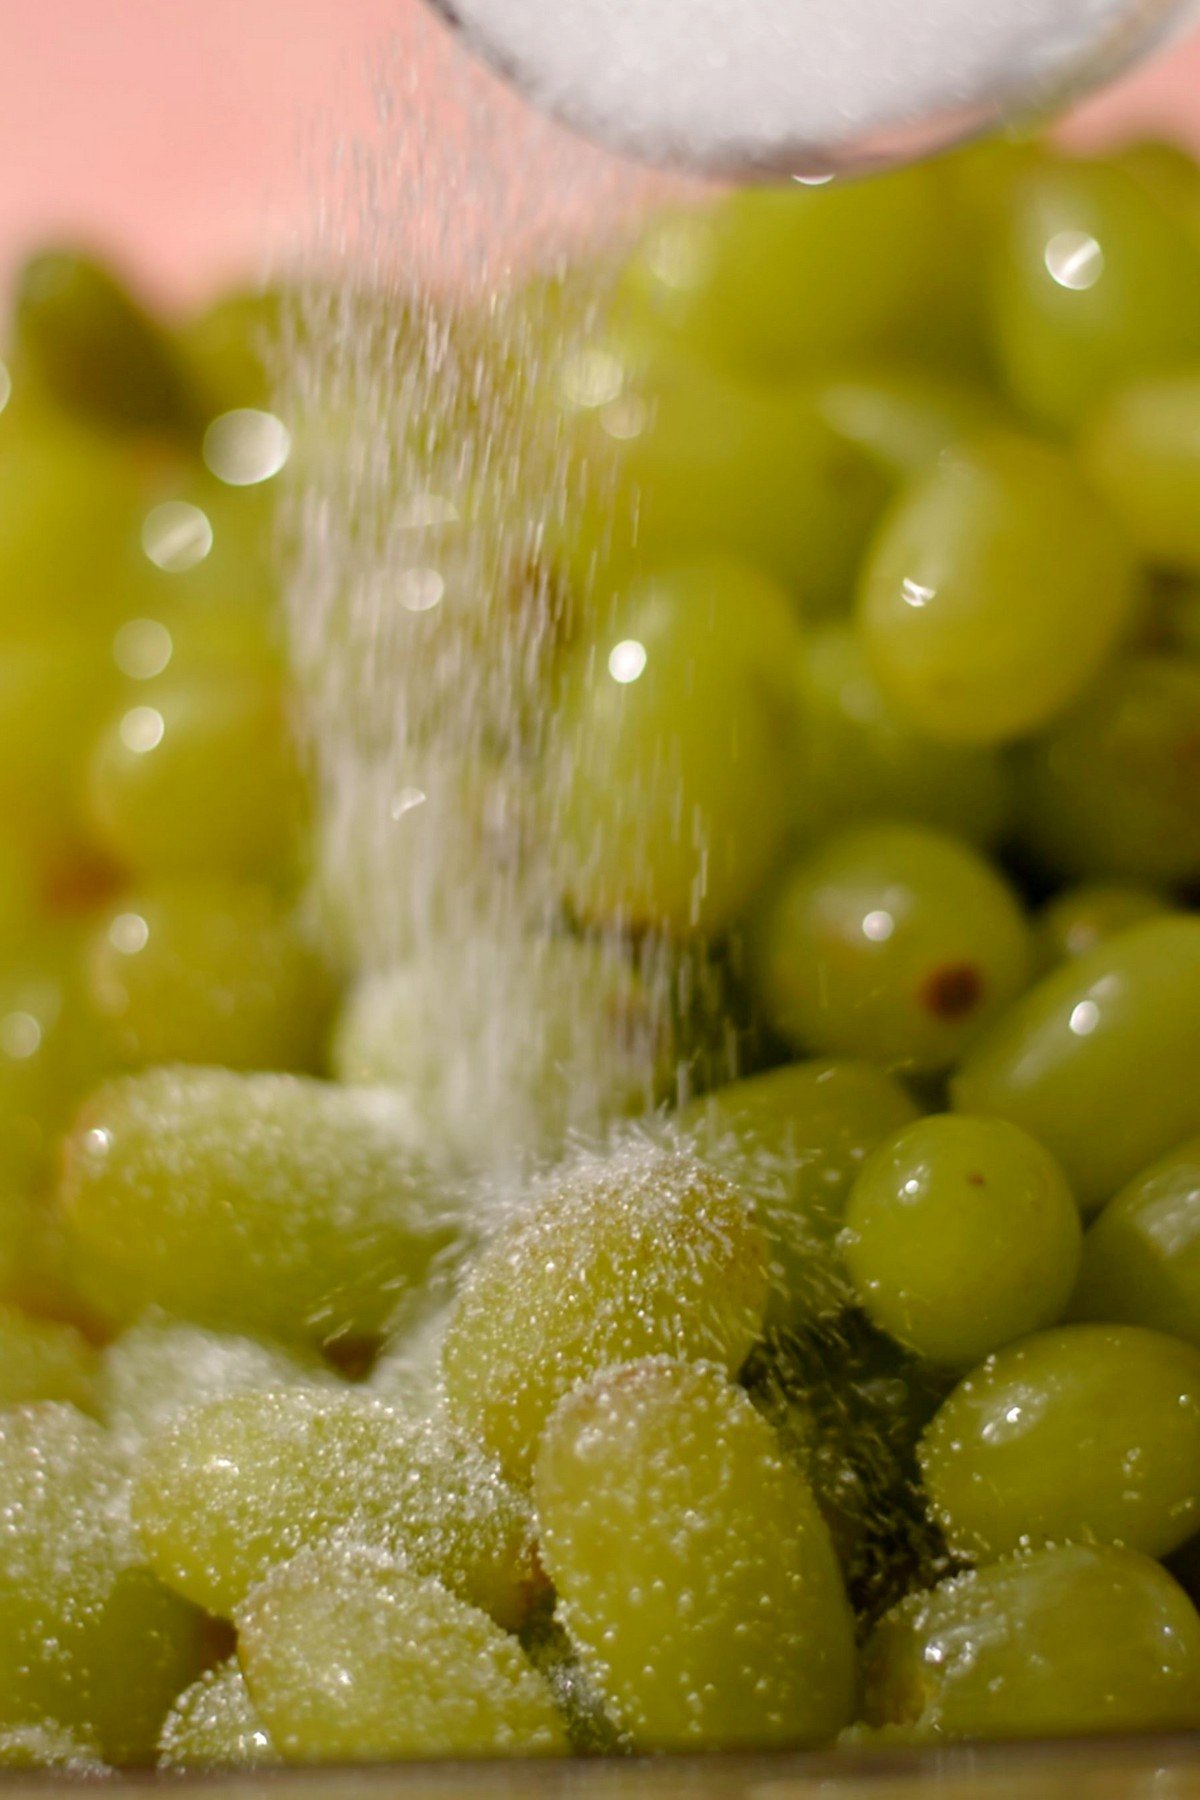 Sugar being poured into grapes.